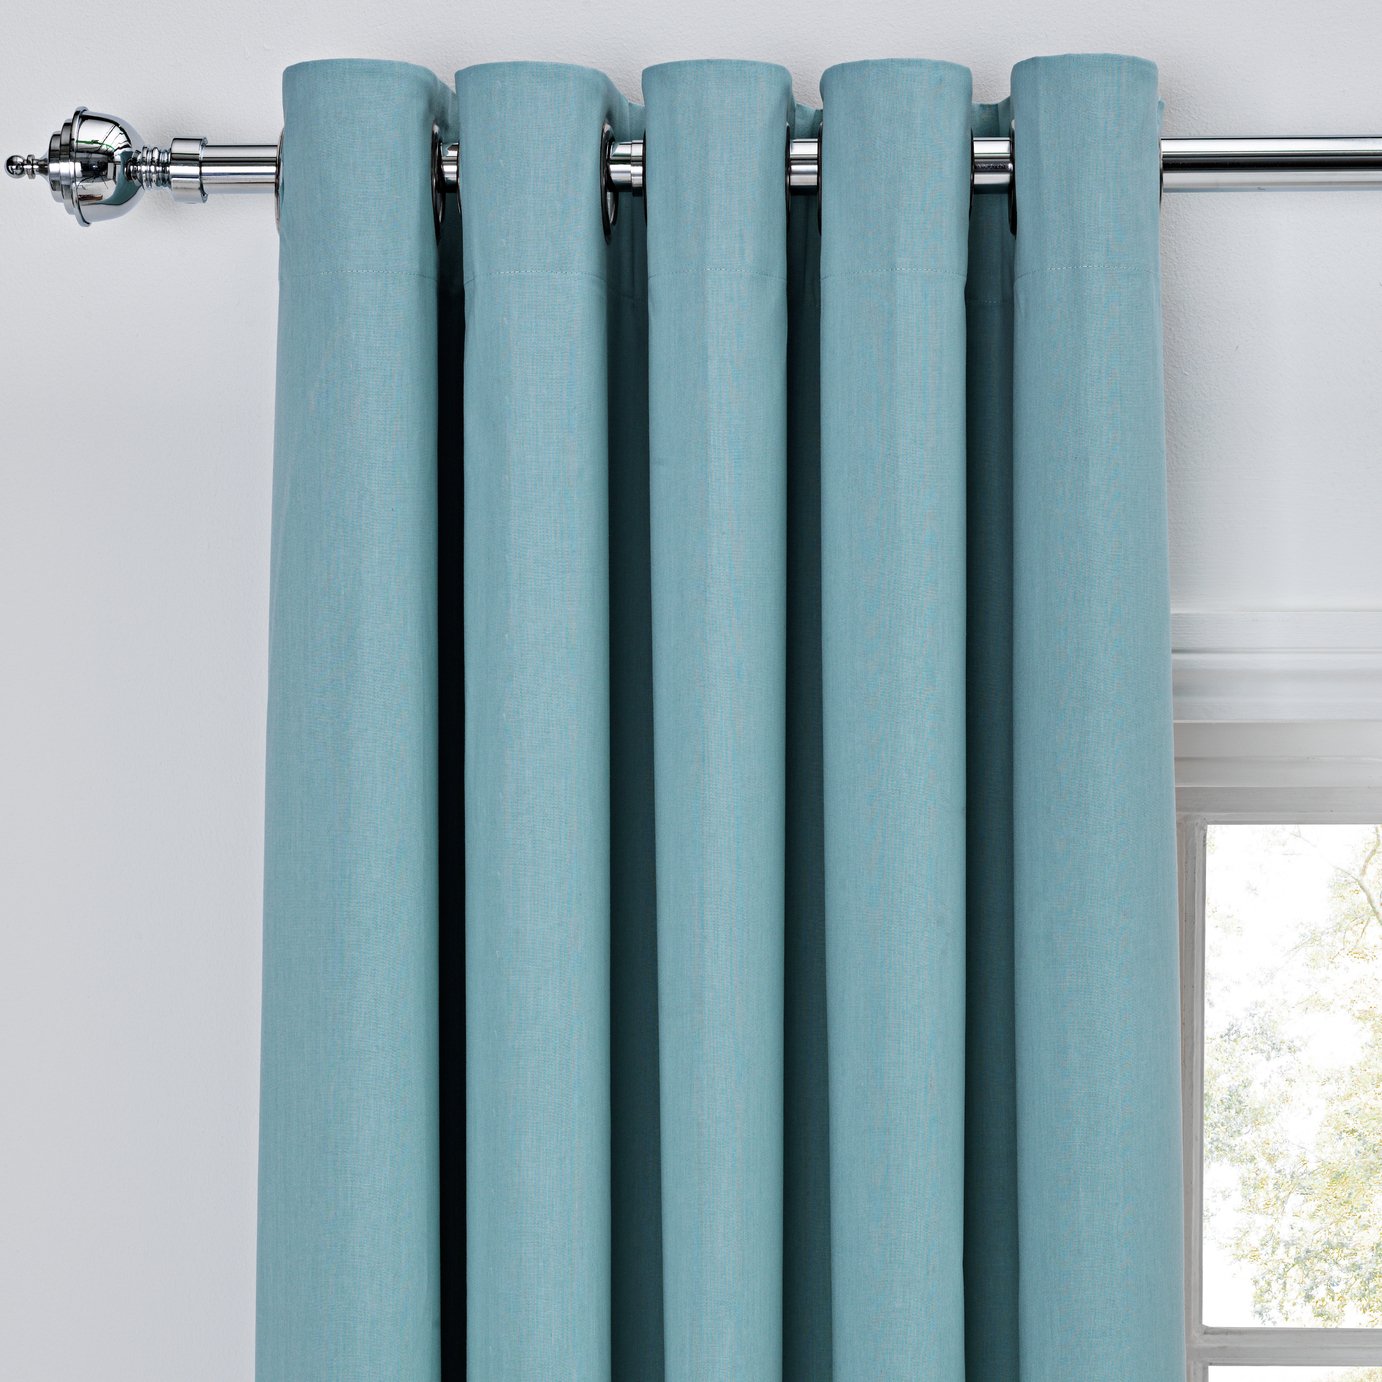 ColourMatch Thermal Blackout Curtains - 117x137cm - Duck Egg